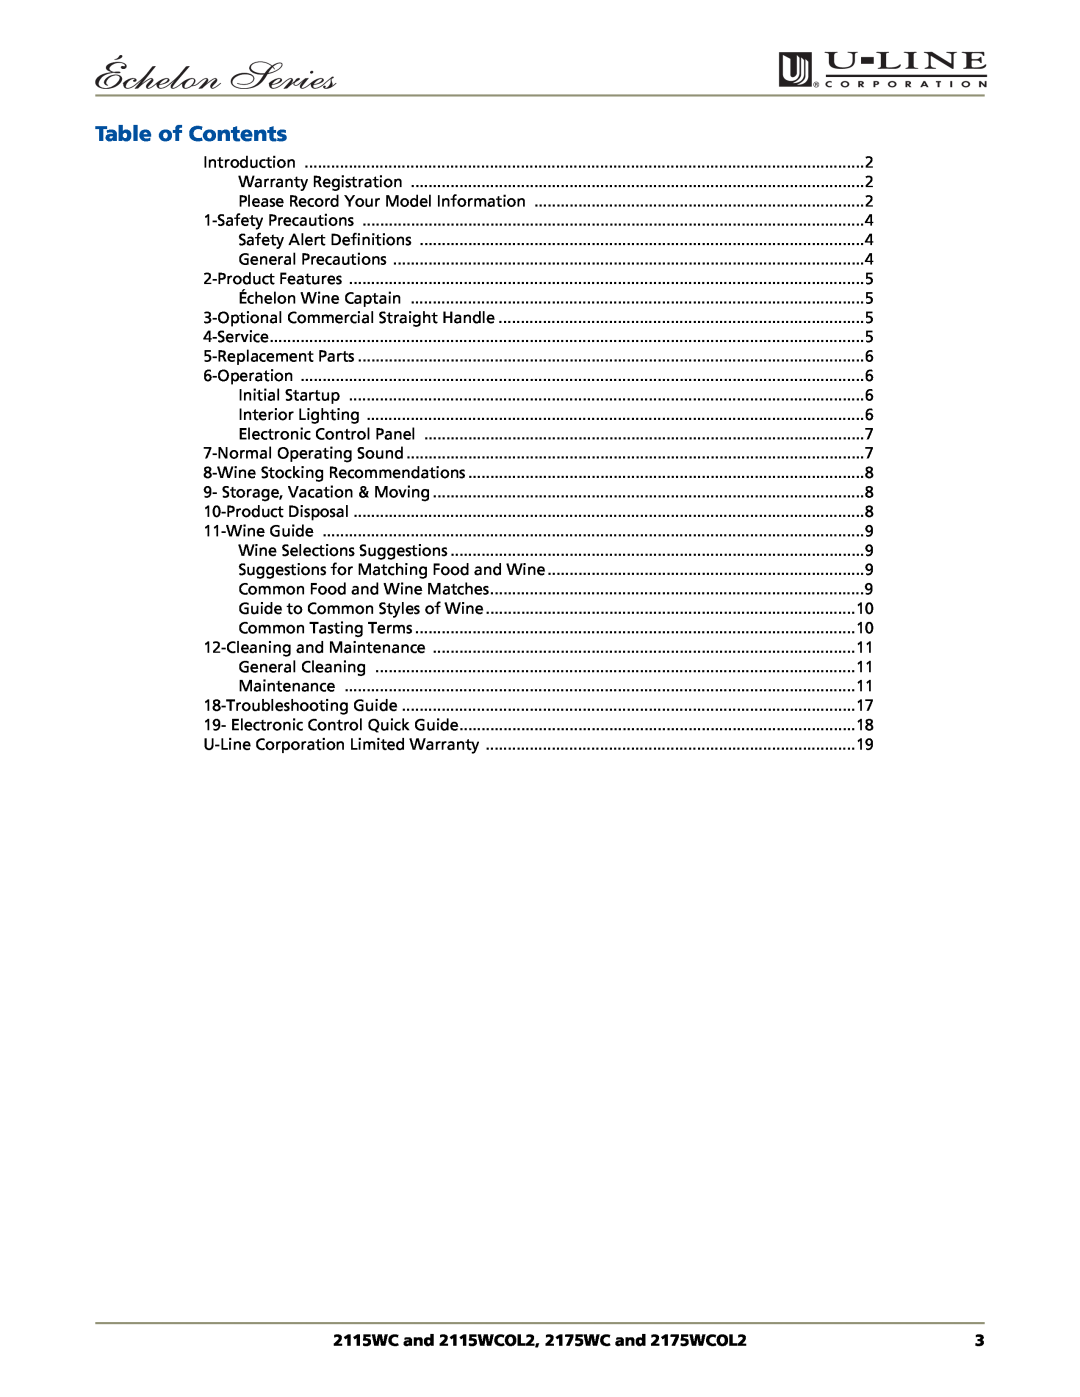 U-Line manual Table of Contents, 2115WC and 2115WCOL2, 2175WC and 2175WCOL2 